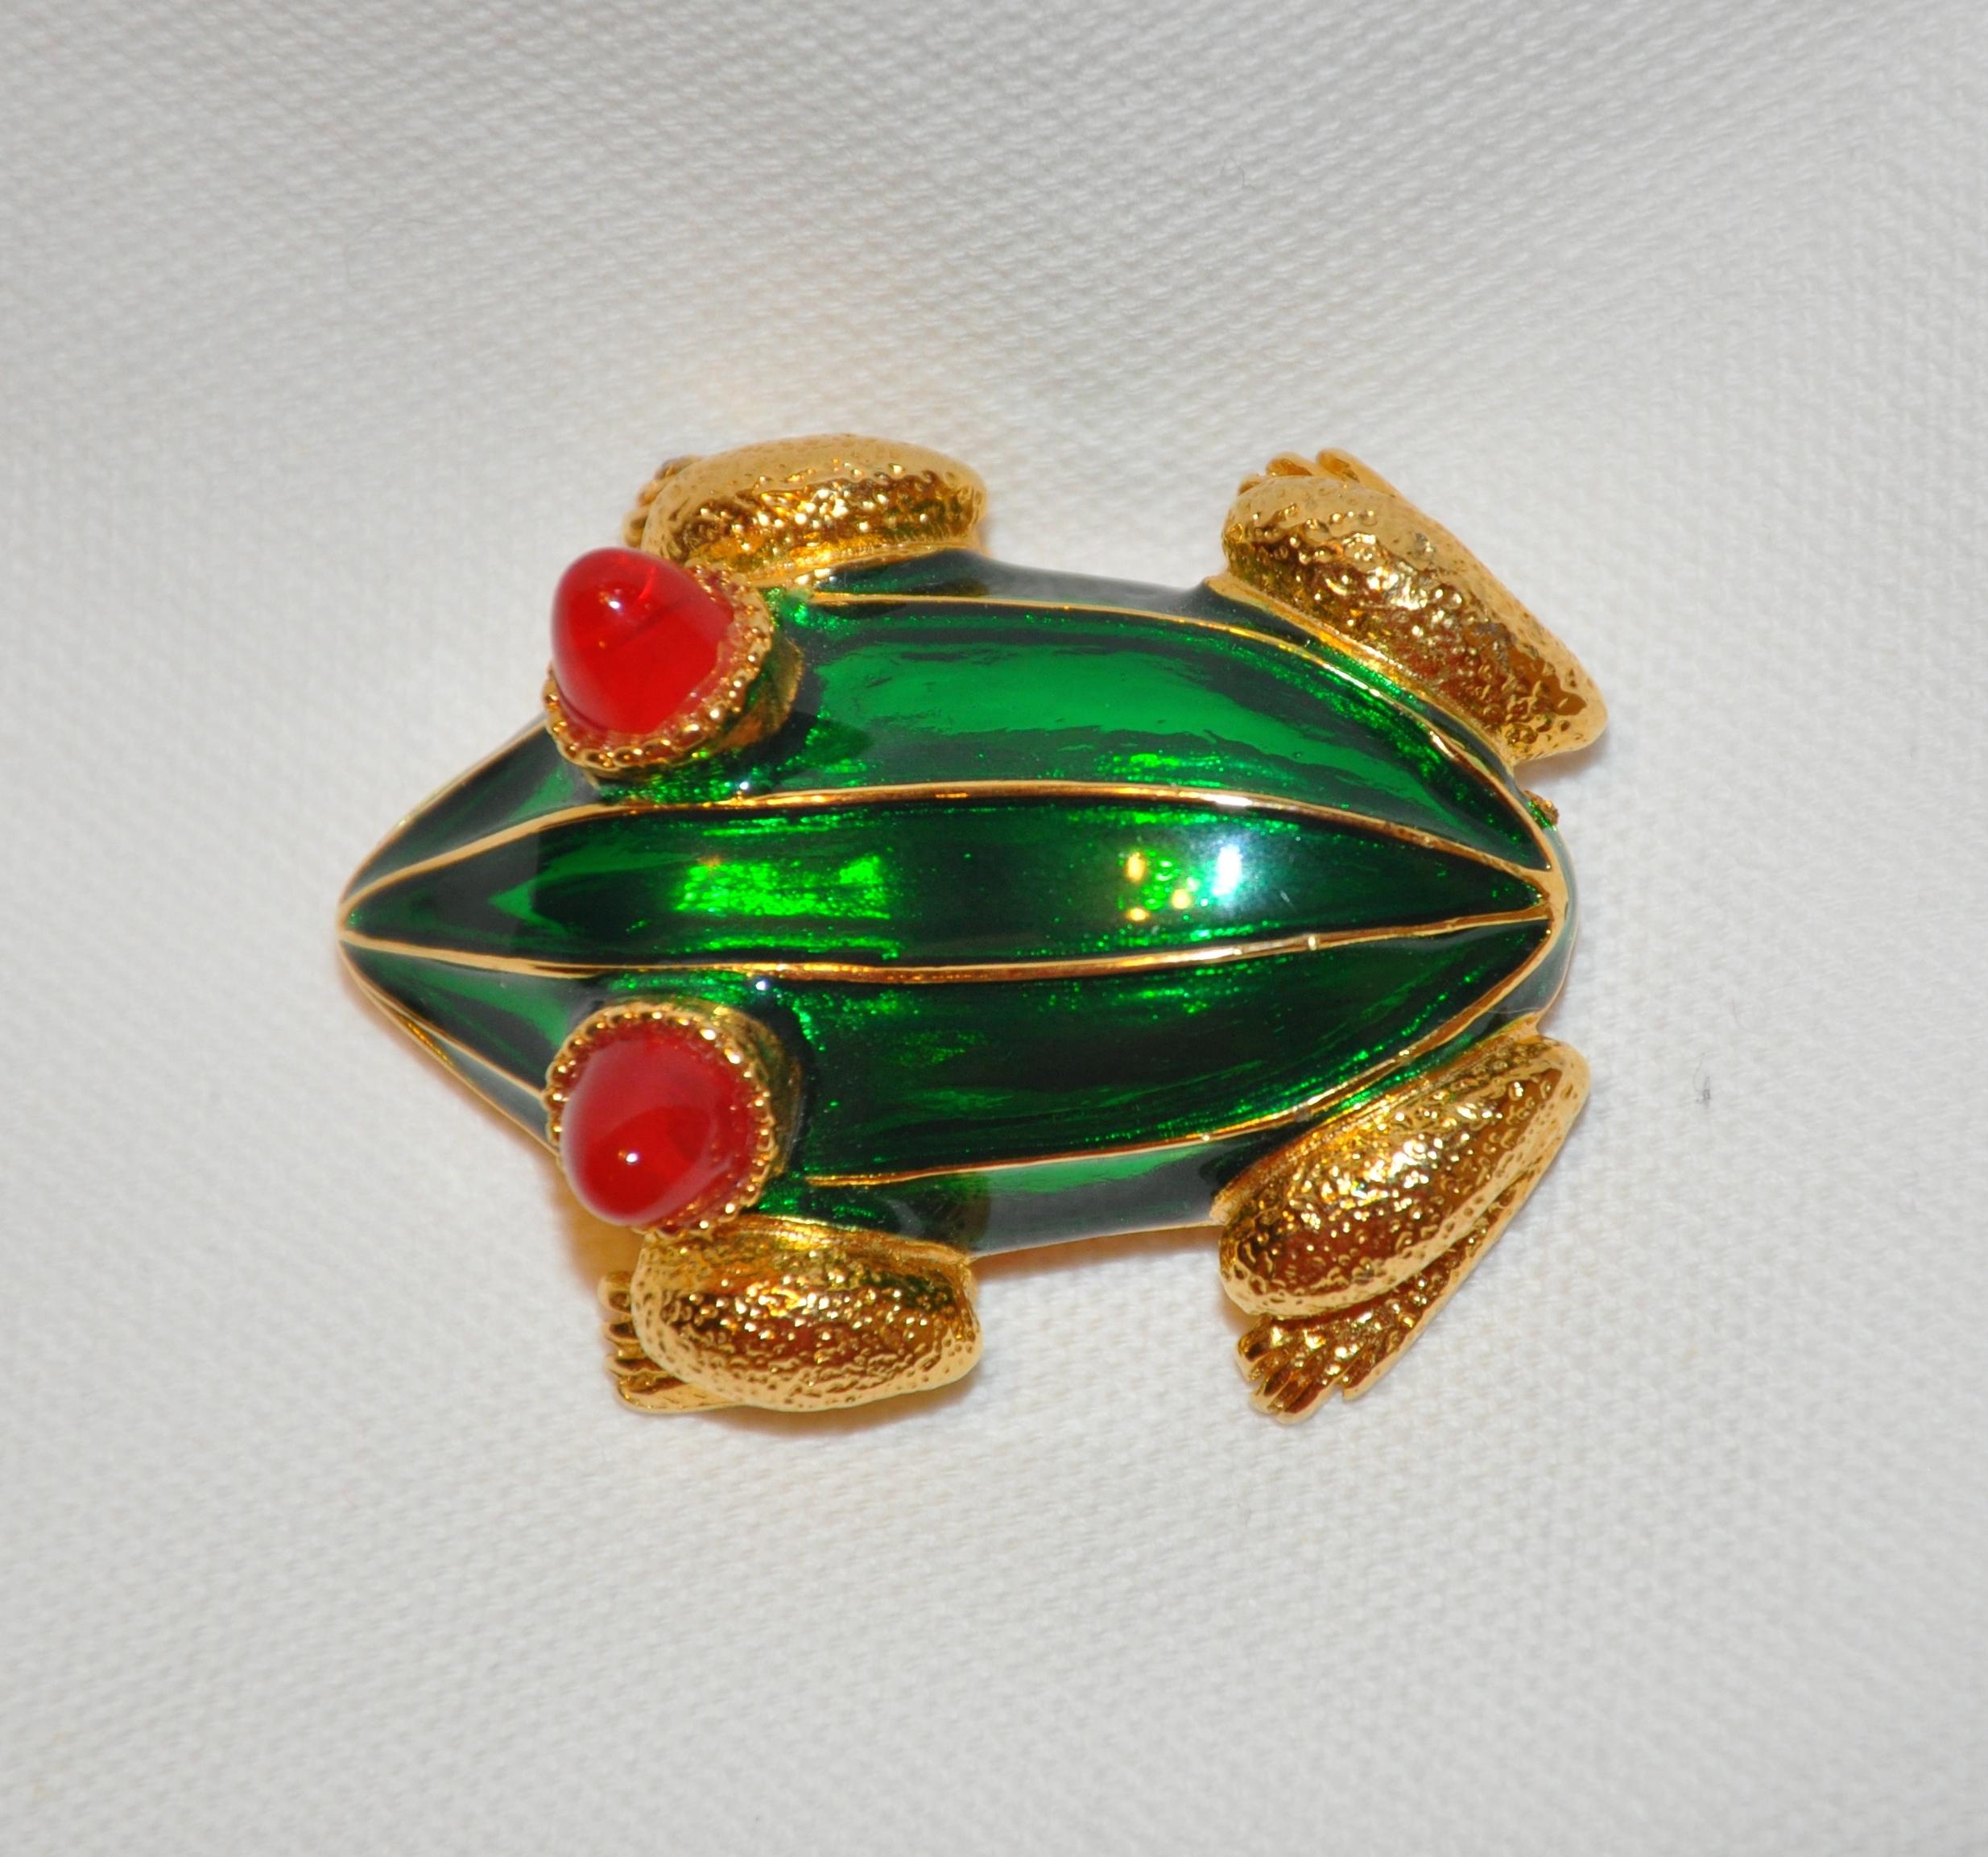 Women's or Men's Kenneth Lane Rare Vivid Whimsical Green Enamel with Red Accent 